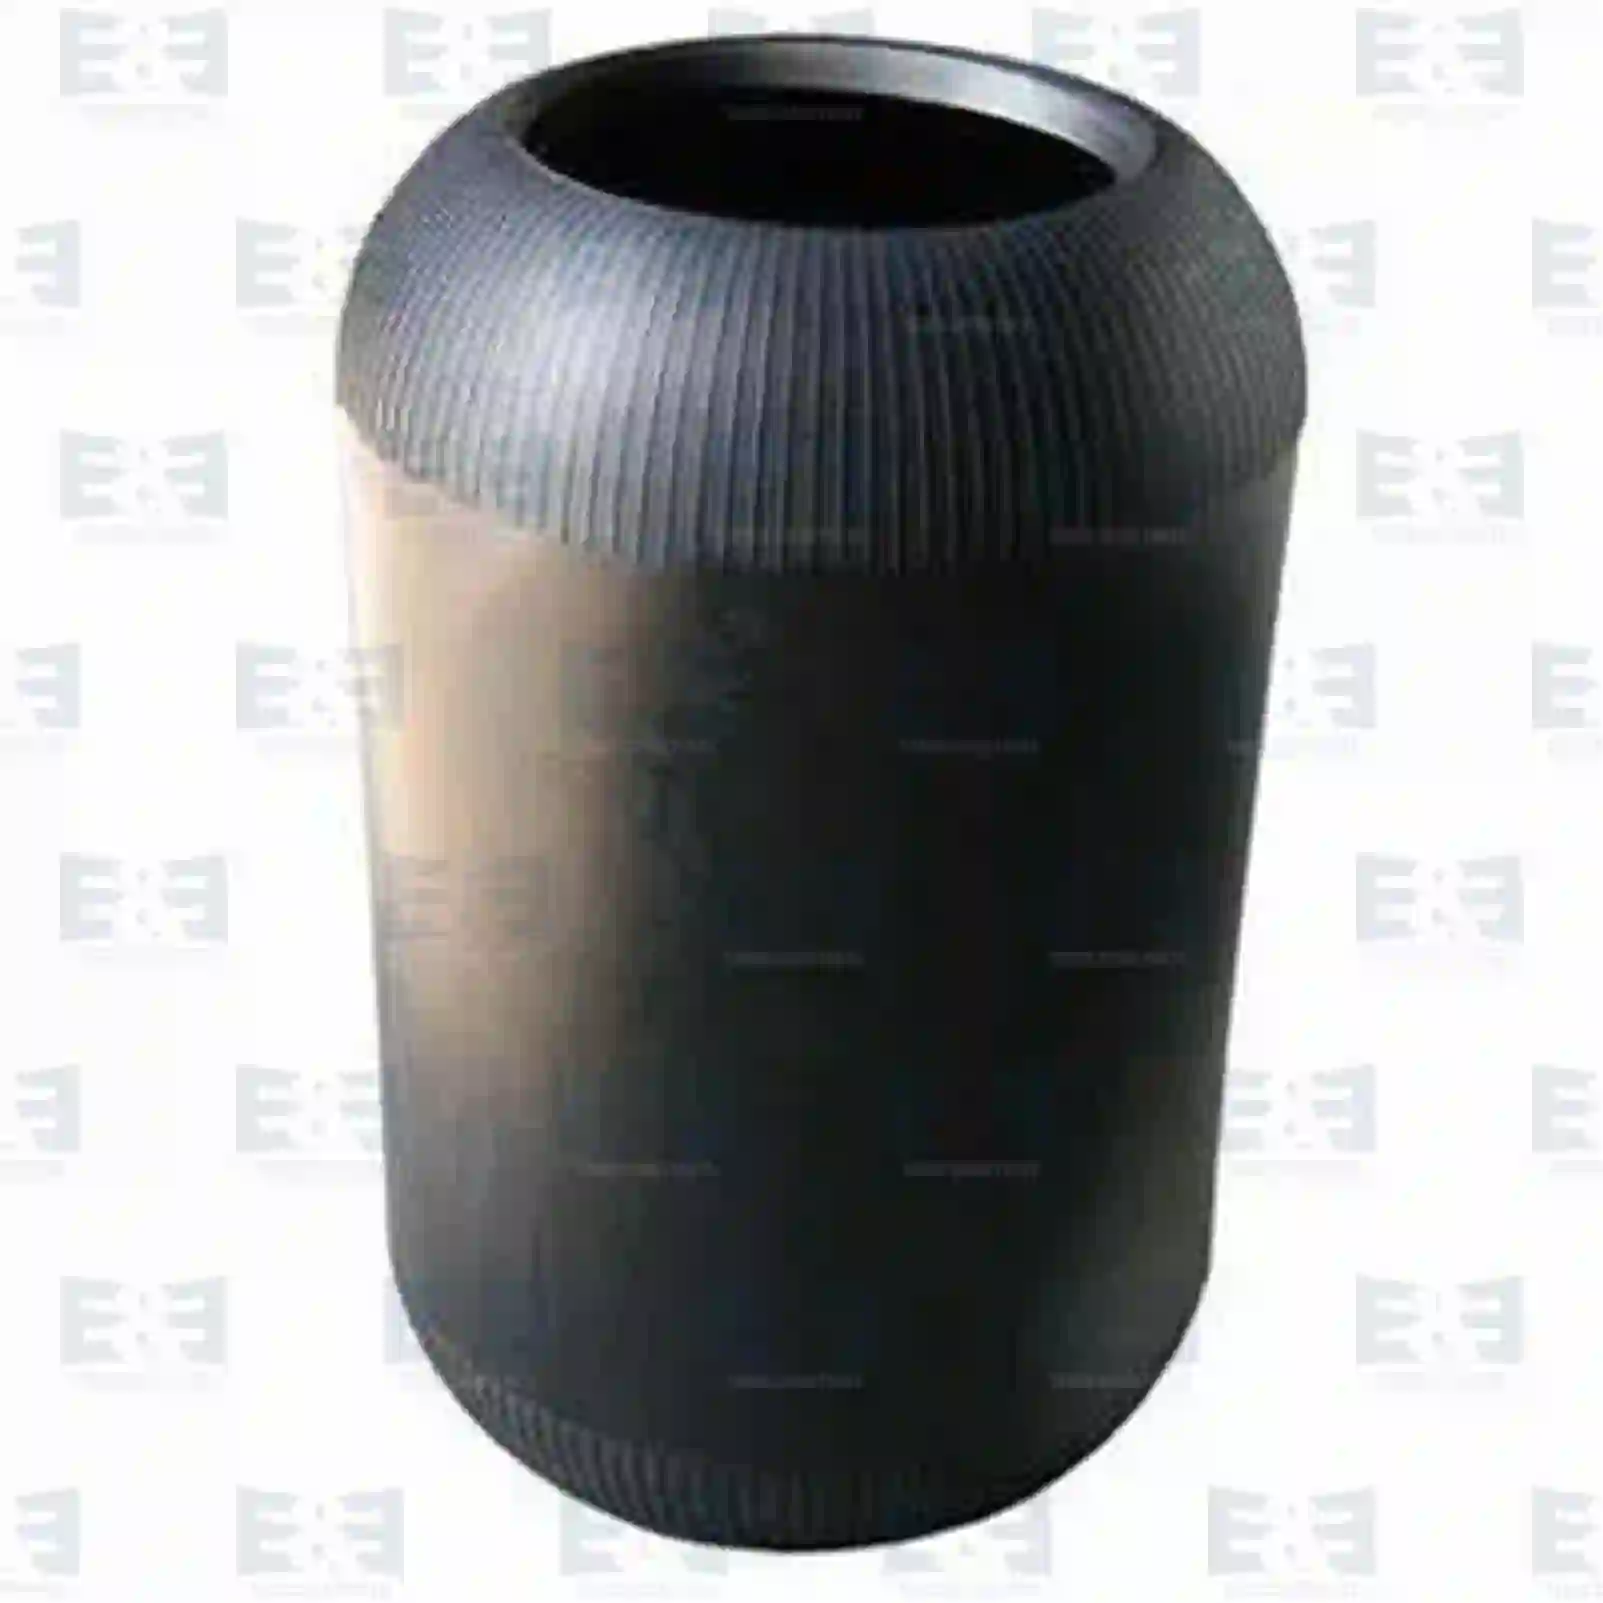 Air spring, without piston, 2E2283463, 00474733, 02498667, 04746733, 41822247, 4746733, 5001829866, 36436010005, 88436010200, 90731120144, 90831120144, N1011016345, 4103270001, 6133270201, 100112250, 5001829866, MLF7000, 750208, 4731012000, 4731031000, 4731042000, 4771427000, 4771440000, 624319670, 624319690, 624319700, 1137882, 1137888, 3159253, ZG40808-0008 ||  2E2283463 E&E Truck Spare Parts | Truck Spare Parts, Auotomotive Spare Parts Air spring, without piston, 2E2283463, 00474733, 02498667, 04746733, 41822247, 4746733, 5001829866, 36436010005, 88436010200, 90731120144, 90831120144, N1011016345, 4103270001, 6133270201, 100112250, 5001829866, MLF7000, 750208, 4731012000, 4731031000, 4731042000, 4771427000, 4771440000, 624319670, 624319690, 624319700, 1137882, 1137888, 3159253, ZG40808-0008 ||  2E2283463 E&E Truck Spare Parts | Truck Spare Parts, Auotomotive Spare Parts